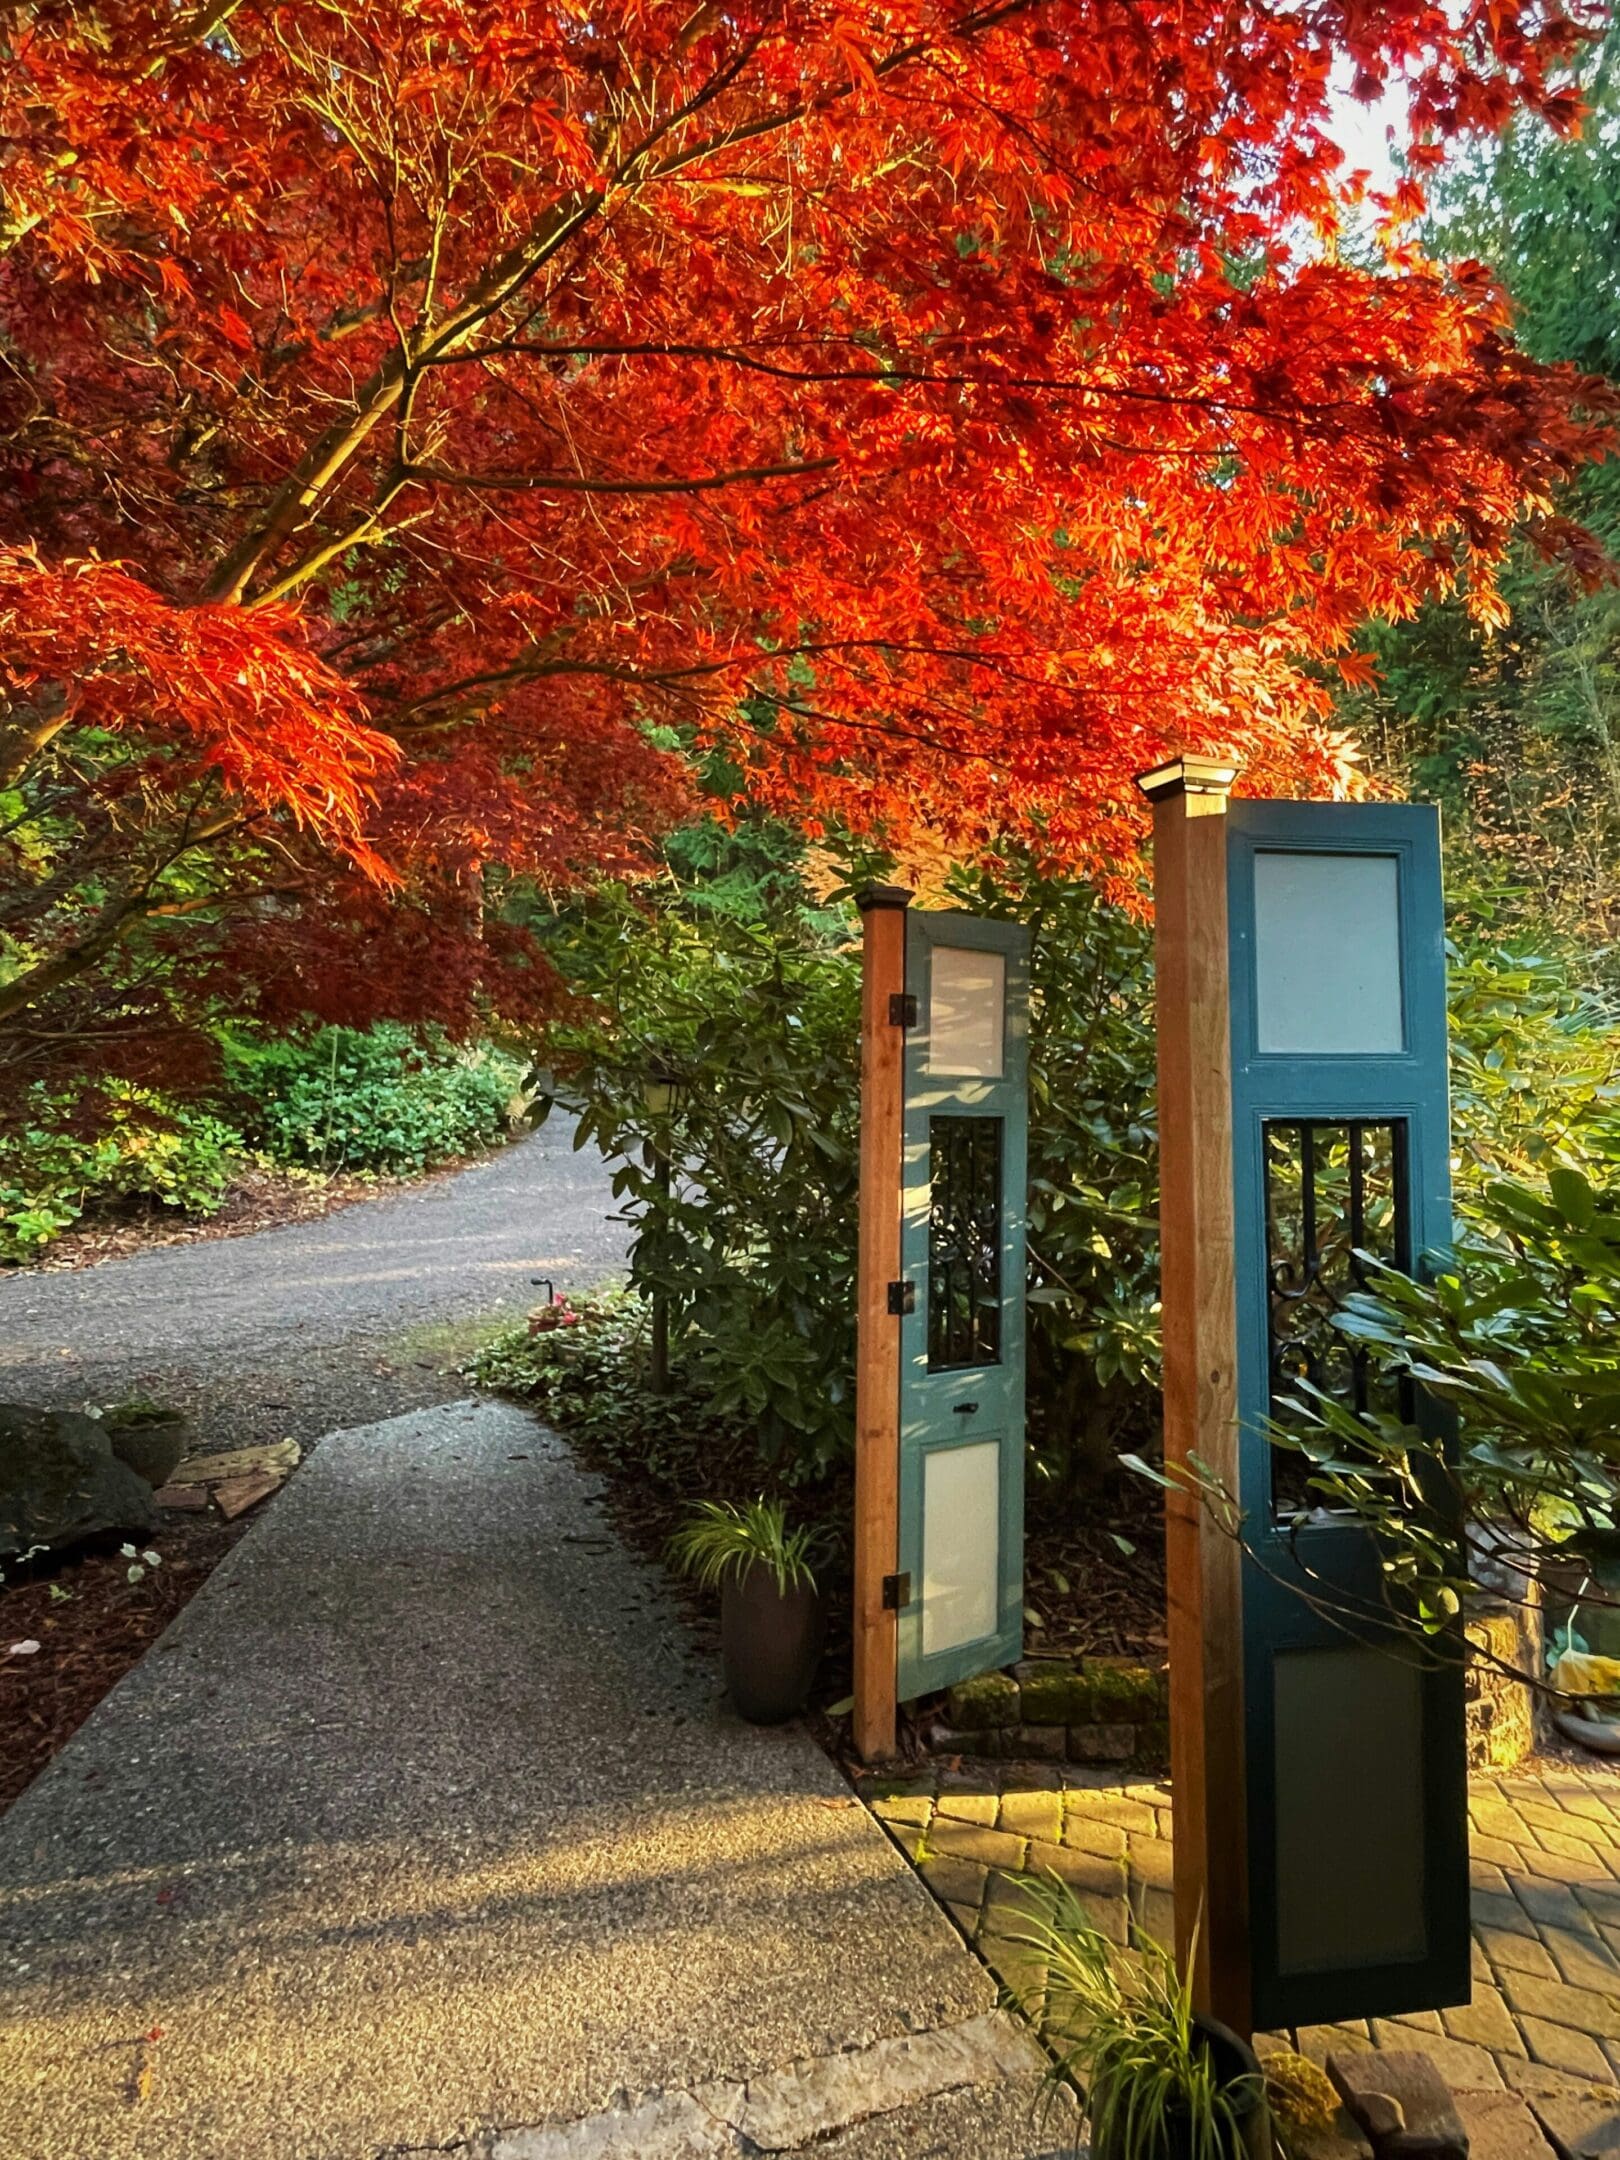 A tree with red leaves is next to a sidewalk.